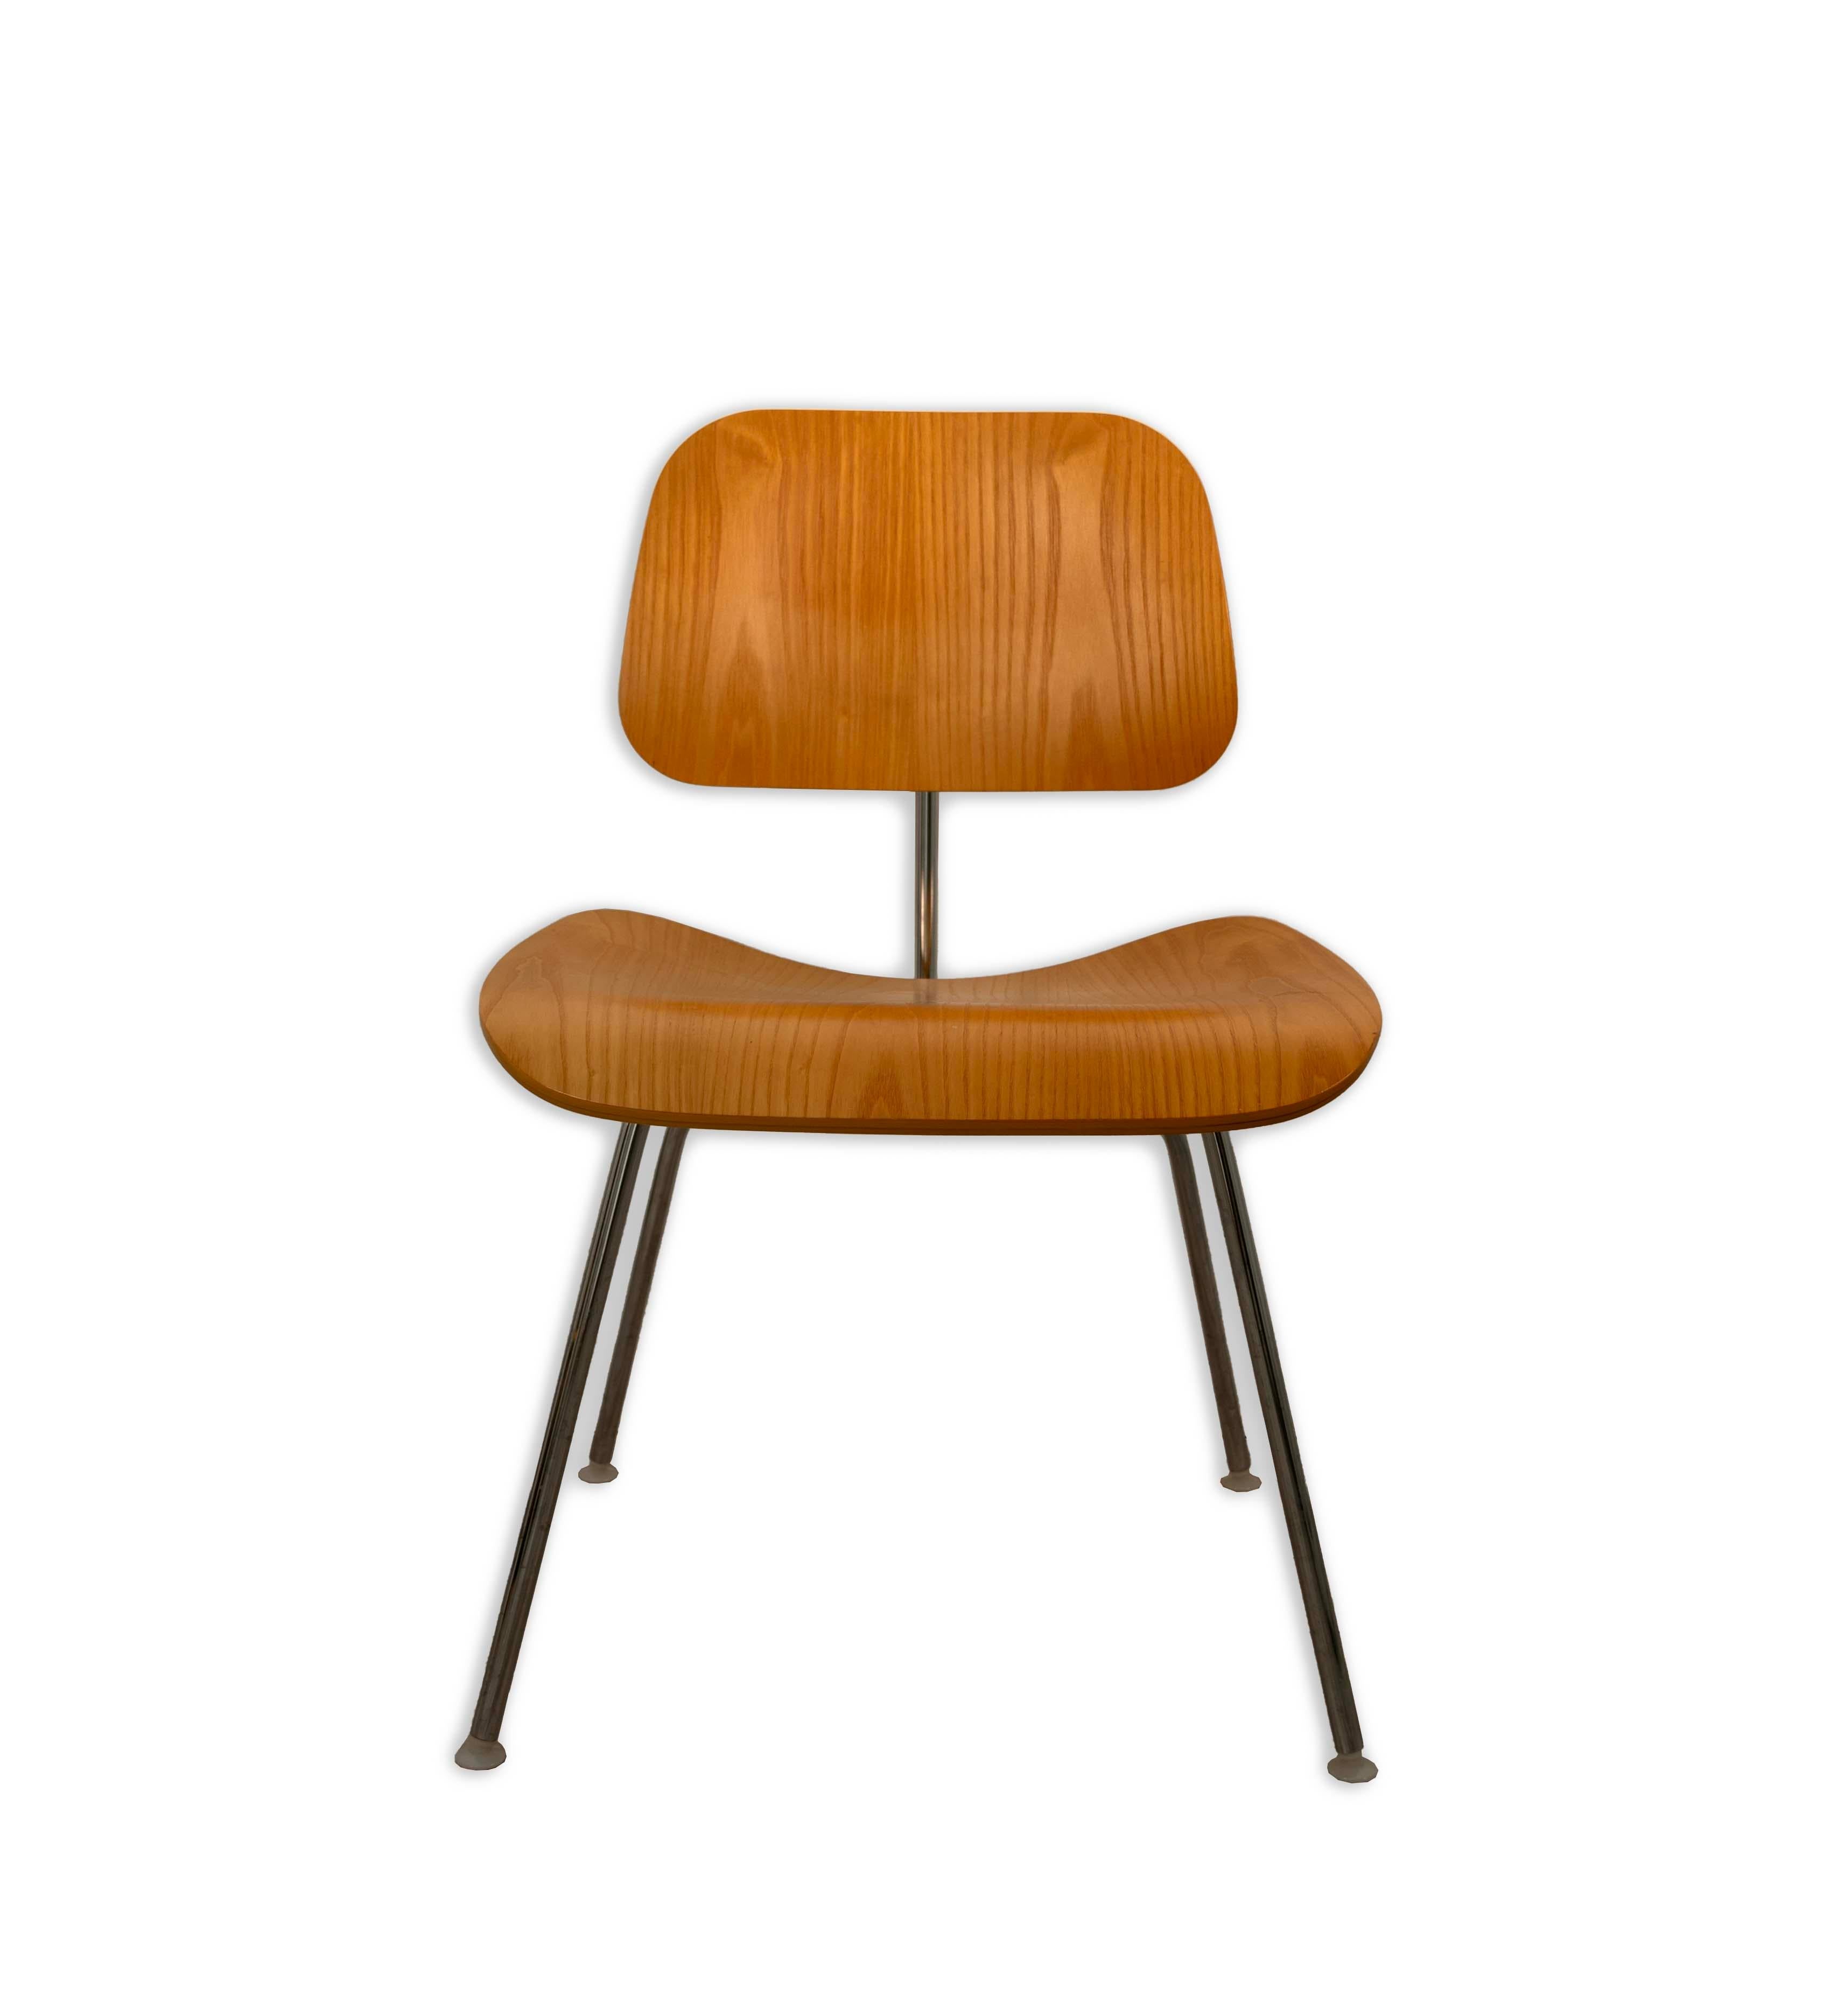  Enhance your home or office with the iconic Mid Century Modern charm of this Eames for Herman Miller DCM Chair. Showcasing the distinctive molded plywood construction, it combines natural beauty with the industrial gleam of its chrome-plated steel